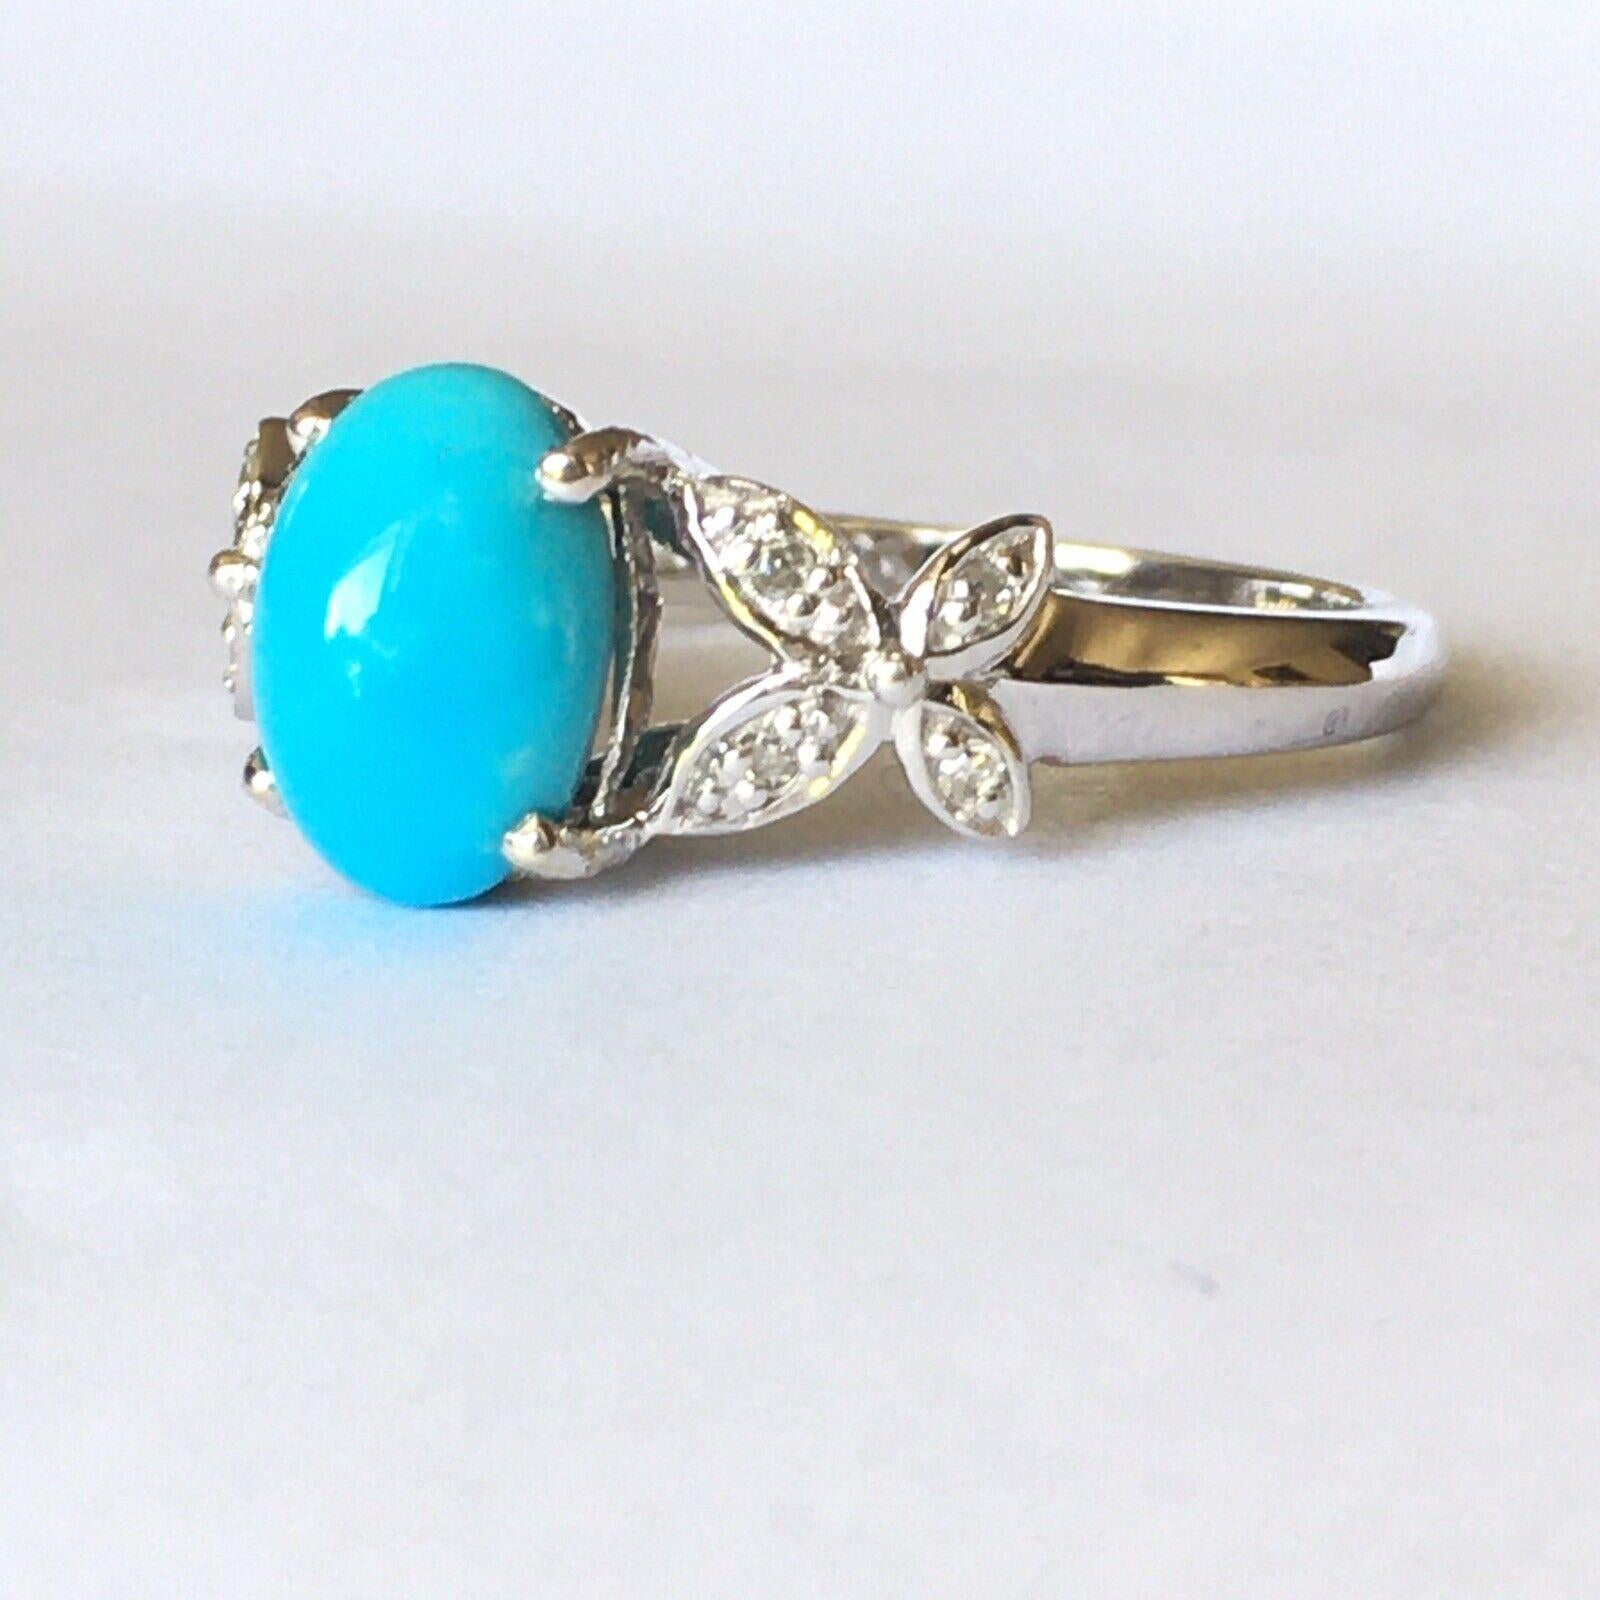 14 Karat Yellow Gold Lady's Turquoise Ring

14 Karat White gold Lady's Diamond Turquoise ring circa 1970s, 8.5mm by 6mm Oval Cabochon cut Turquoise 8 pieces of Full Cut diamonds approximate TDW 1/10 Carat , in excellent condition considering the